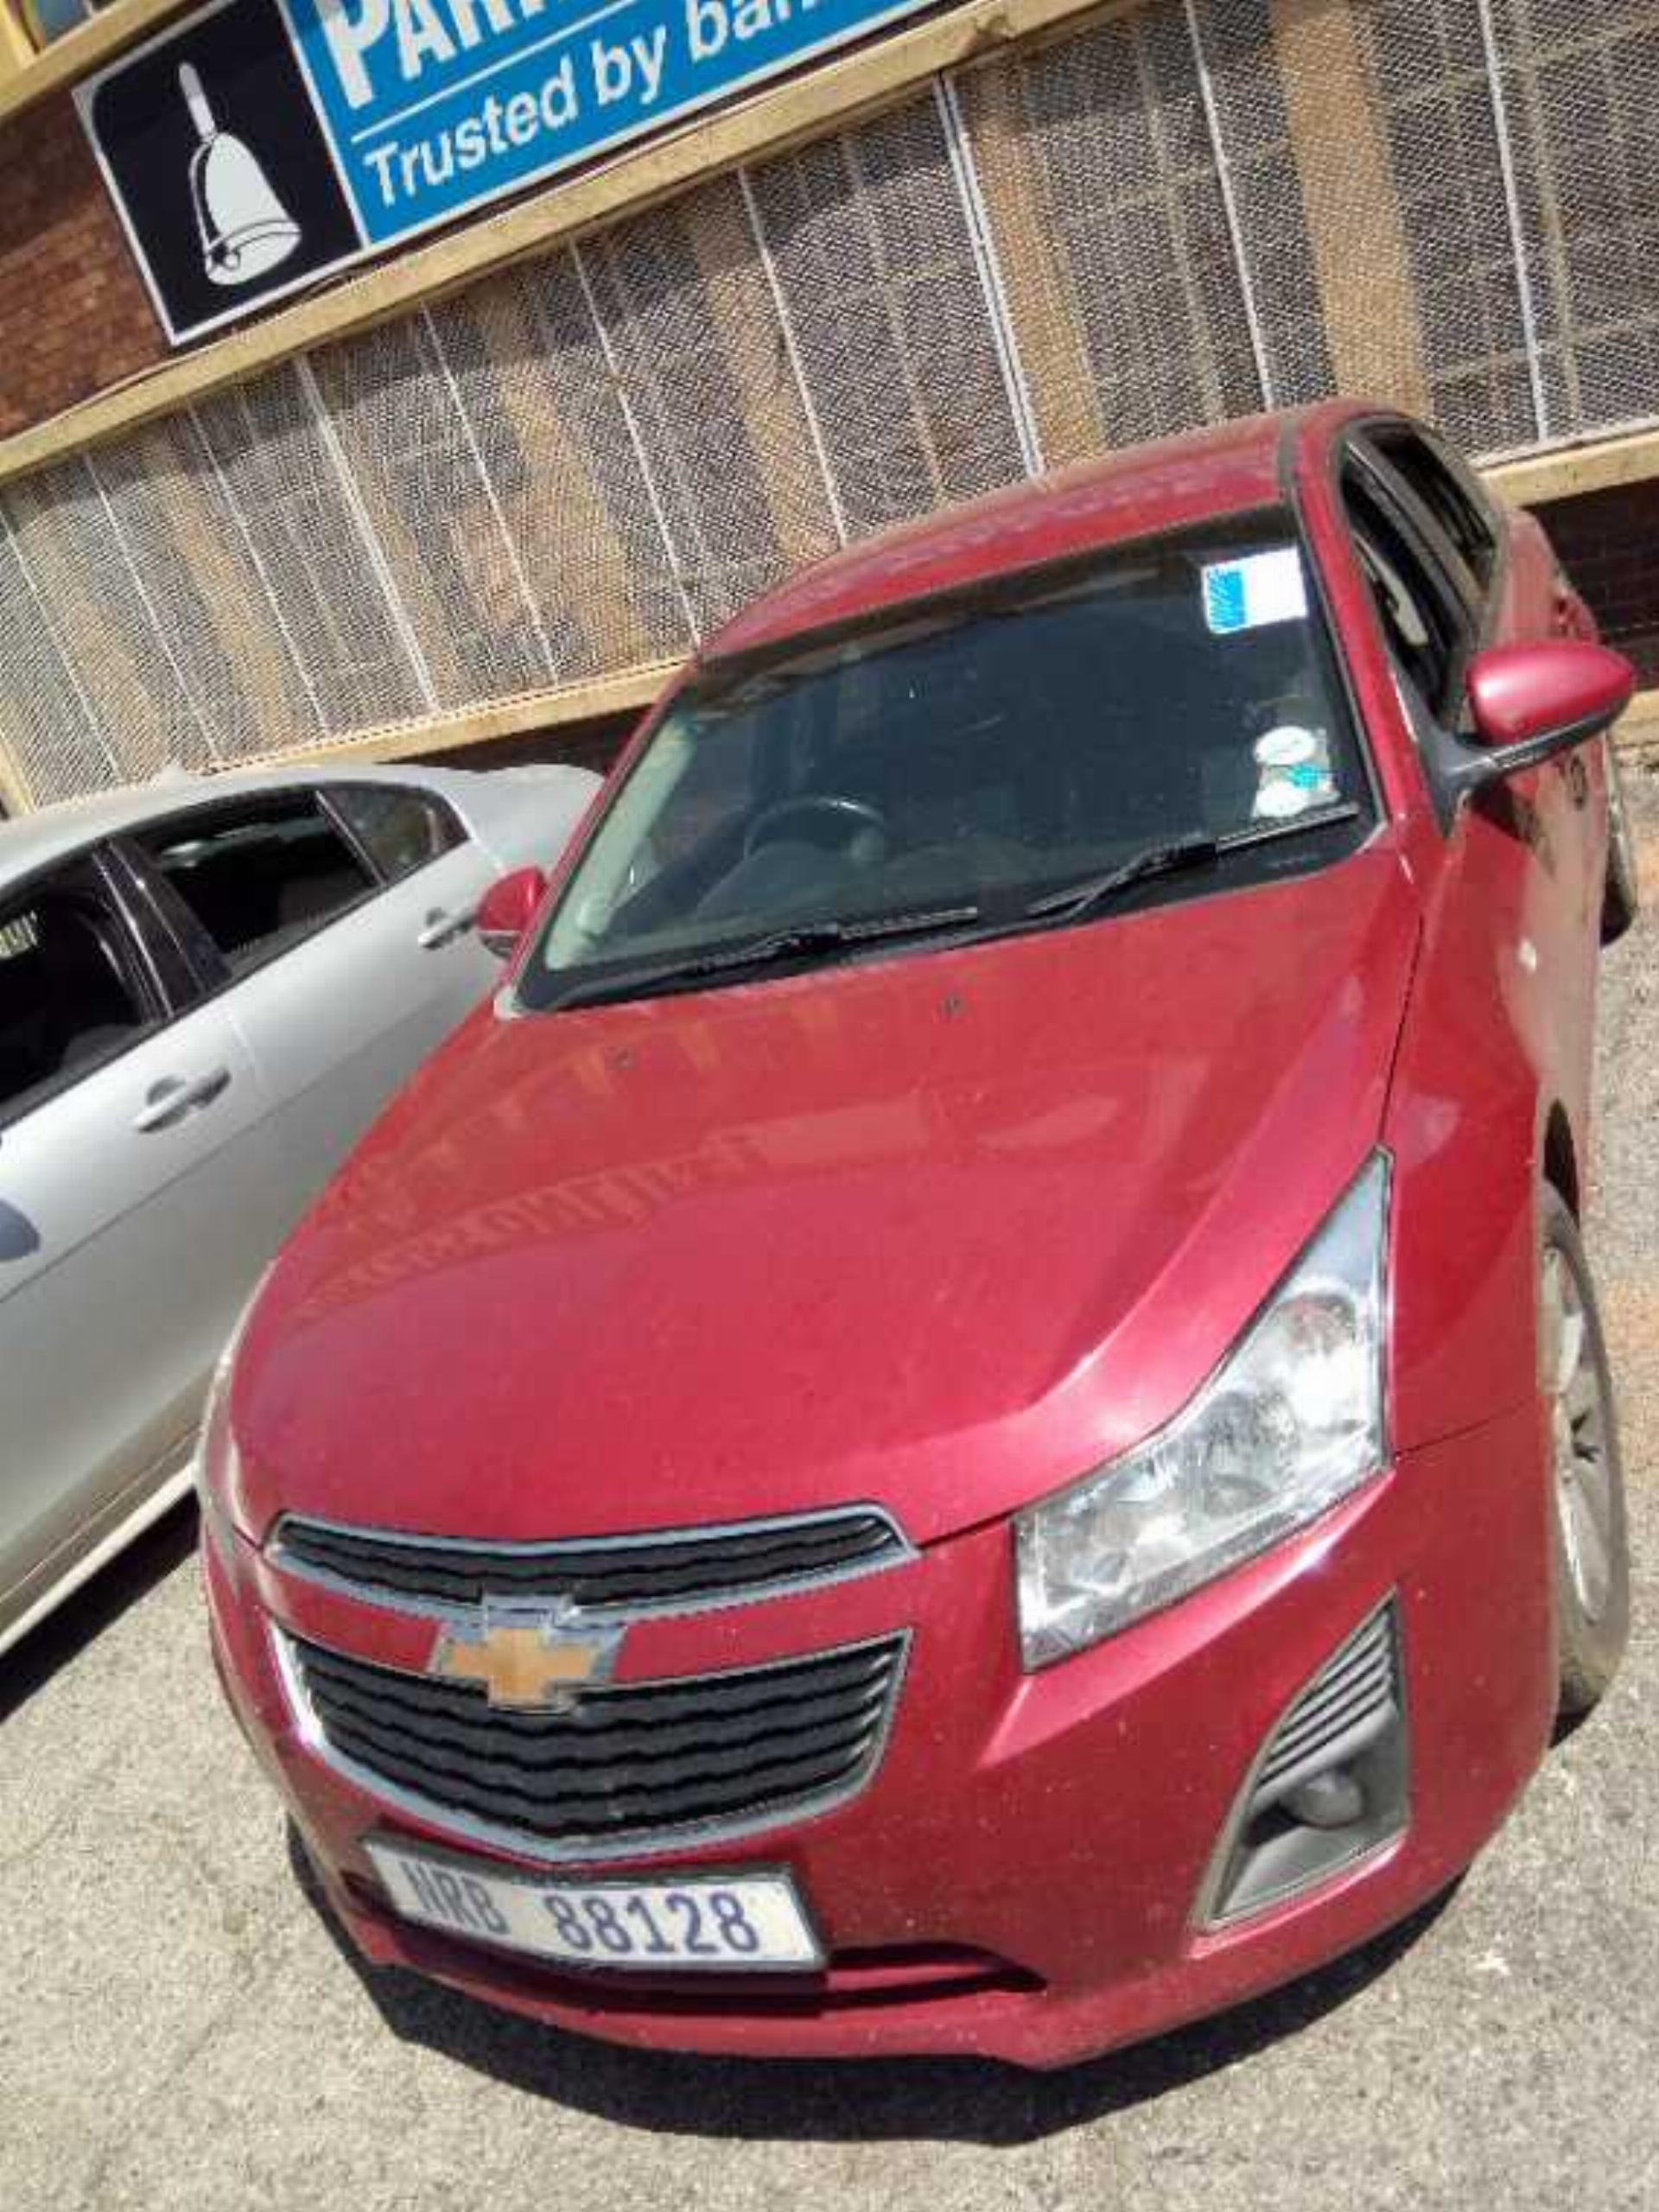 Repossessed Chevrolet Cruze 1.6 LS 5DR 2012 on auction